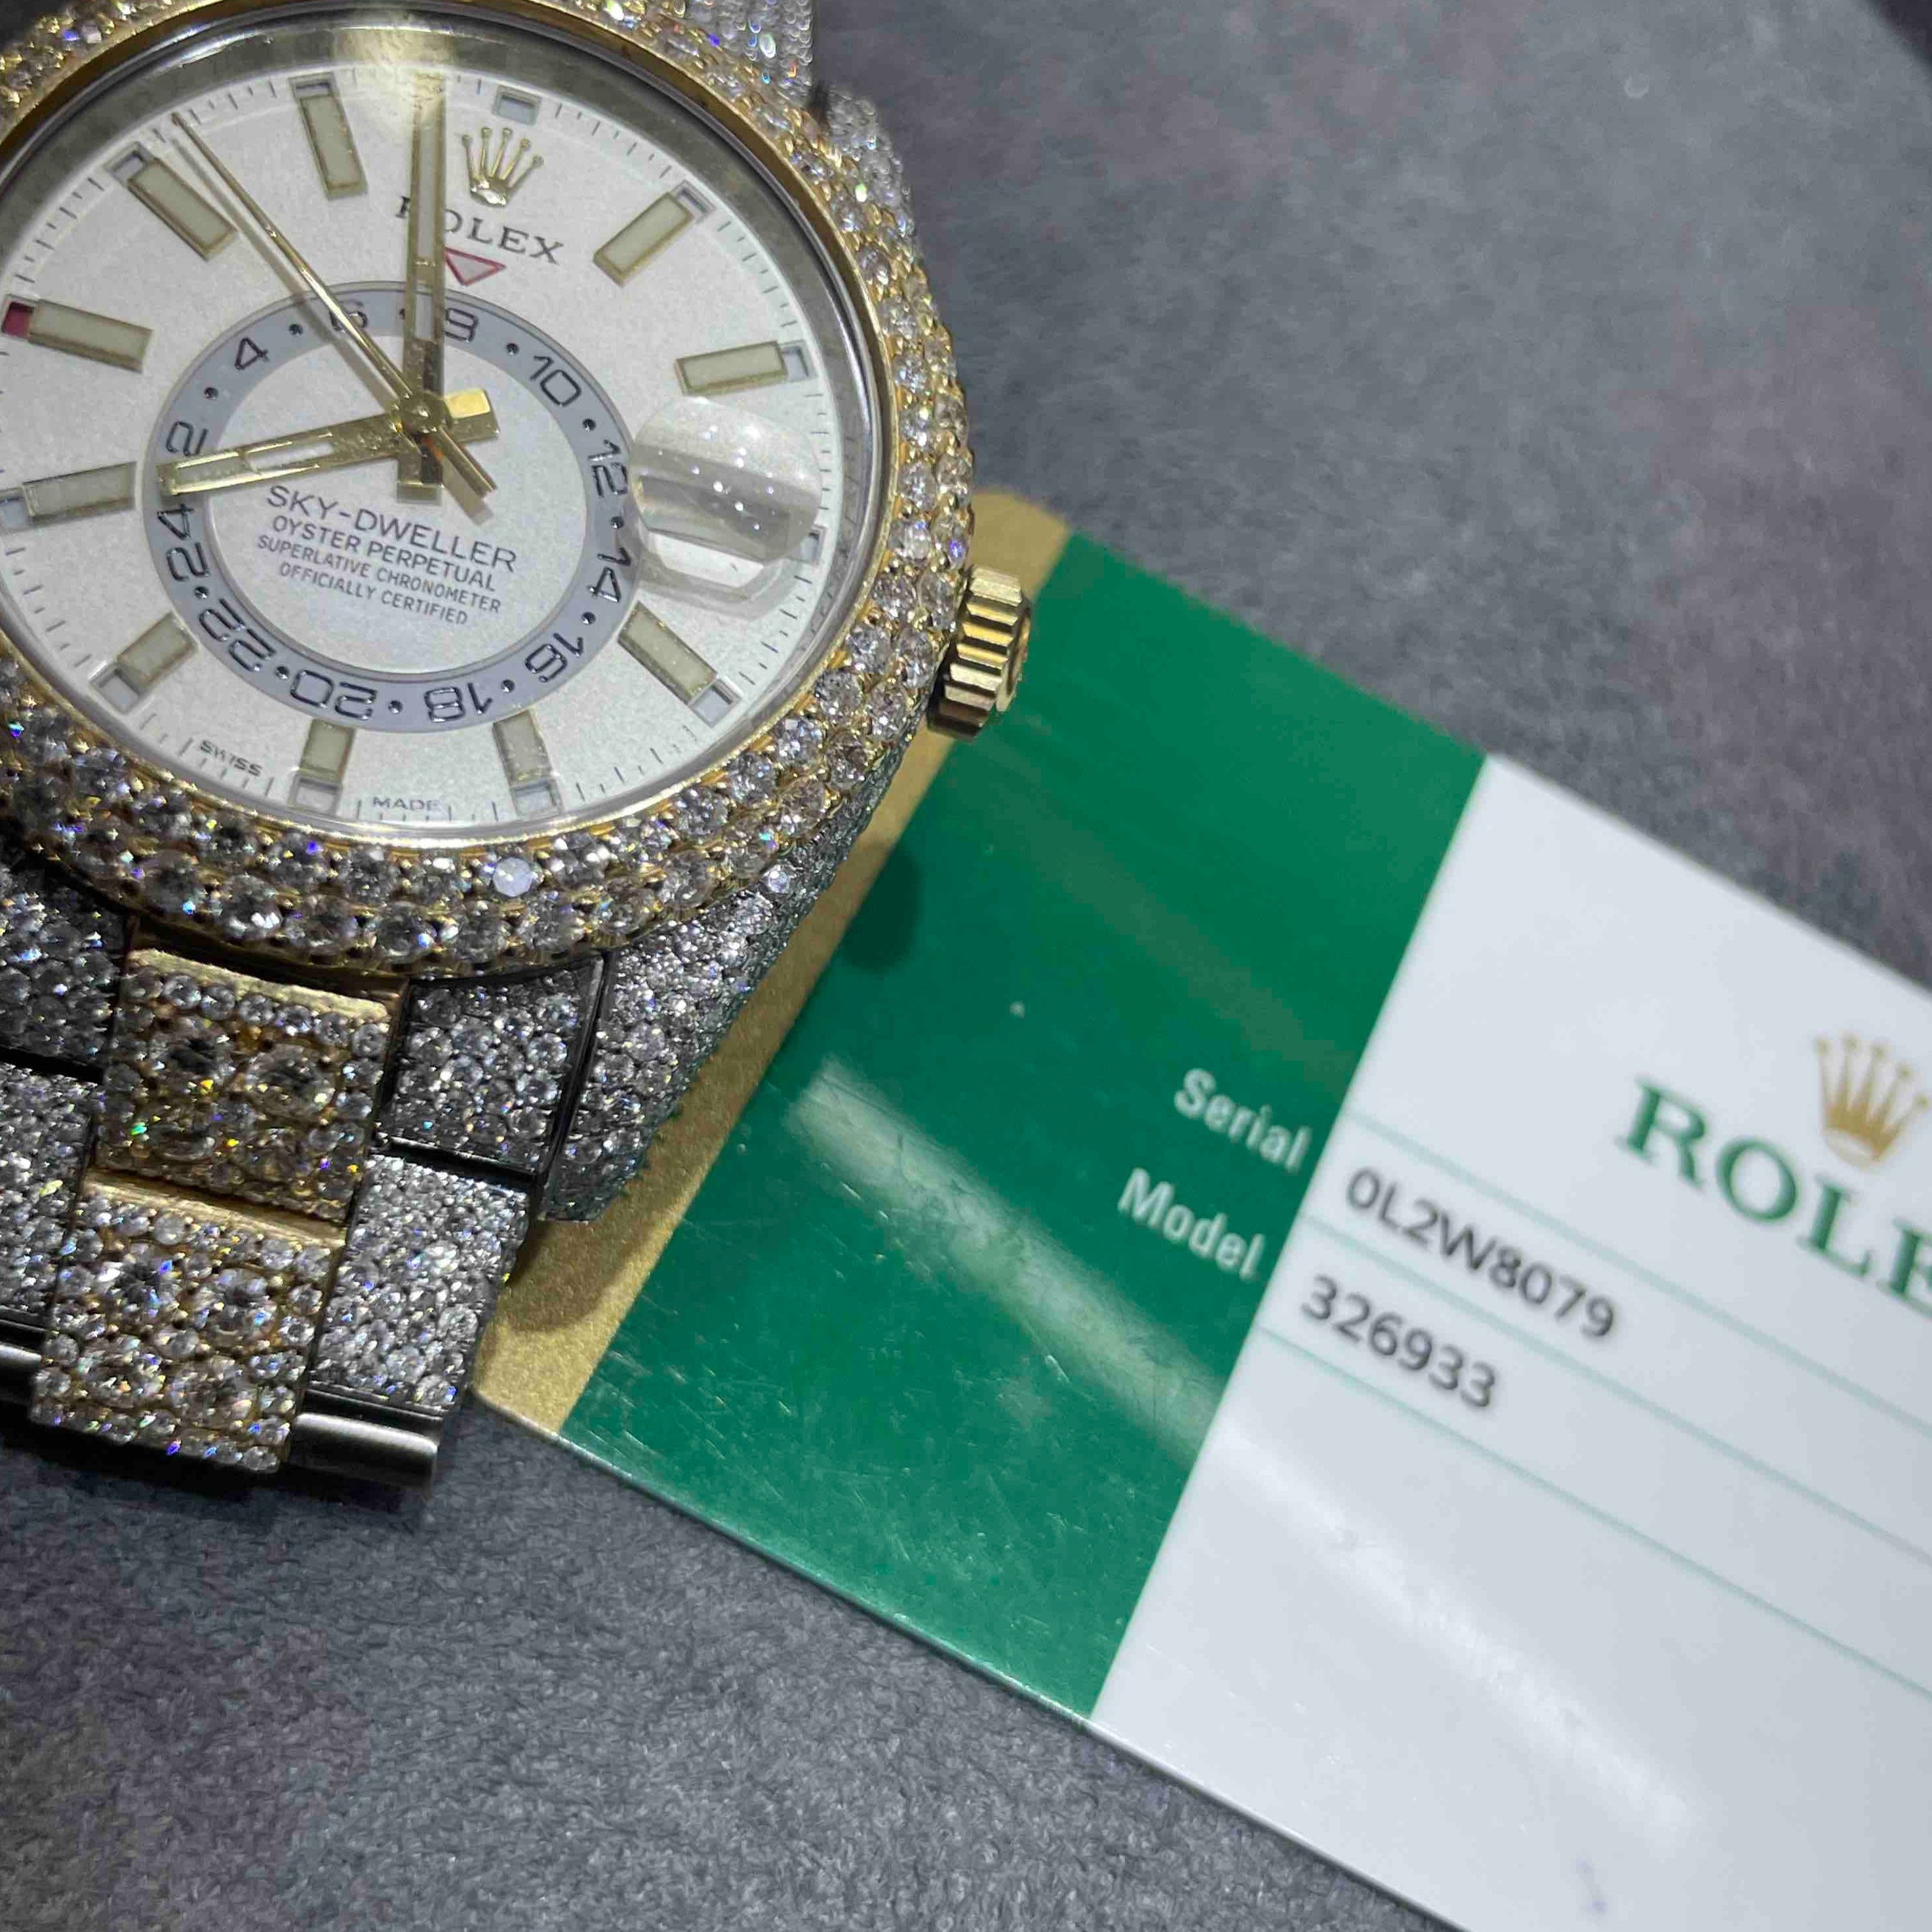 iced rolex "bust down" two tone sky dweller watch with 37 cts of vs1 diamonds